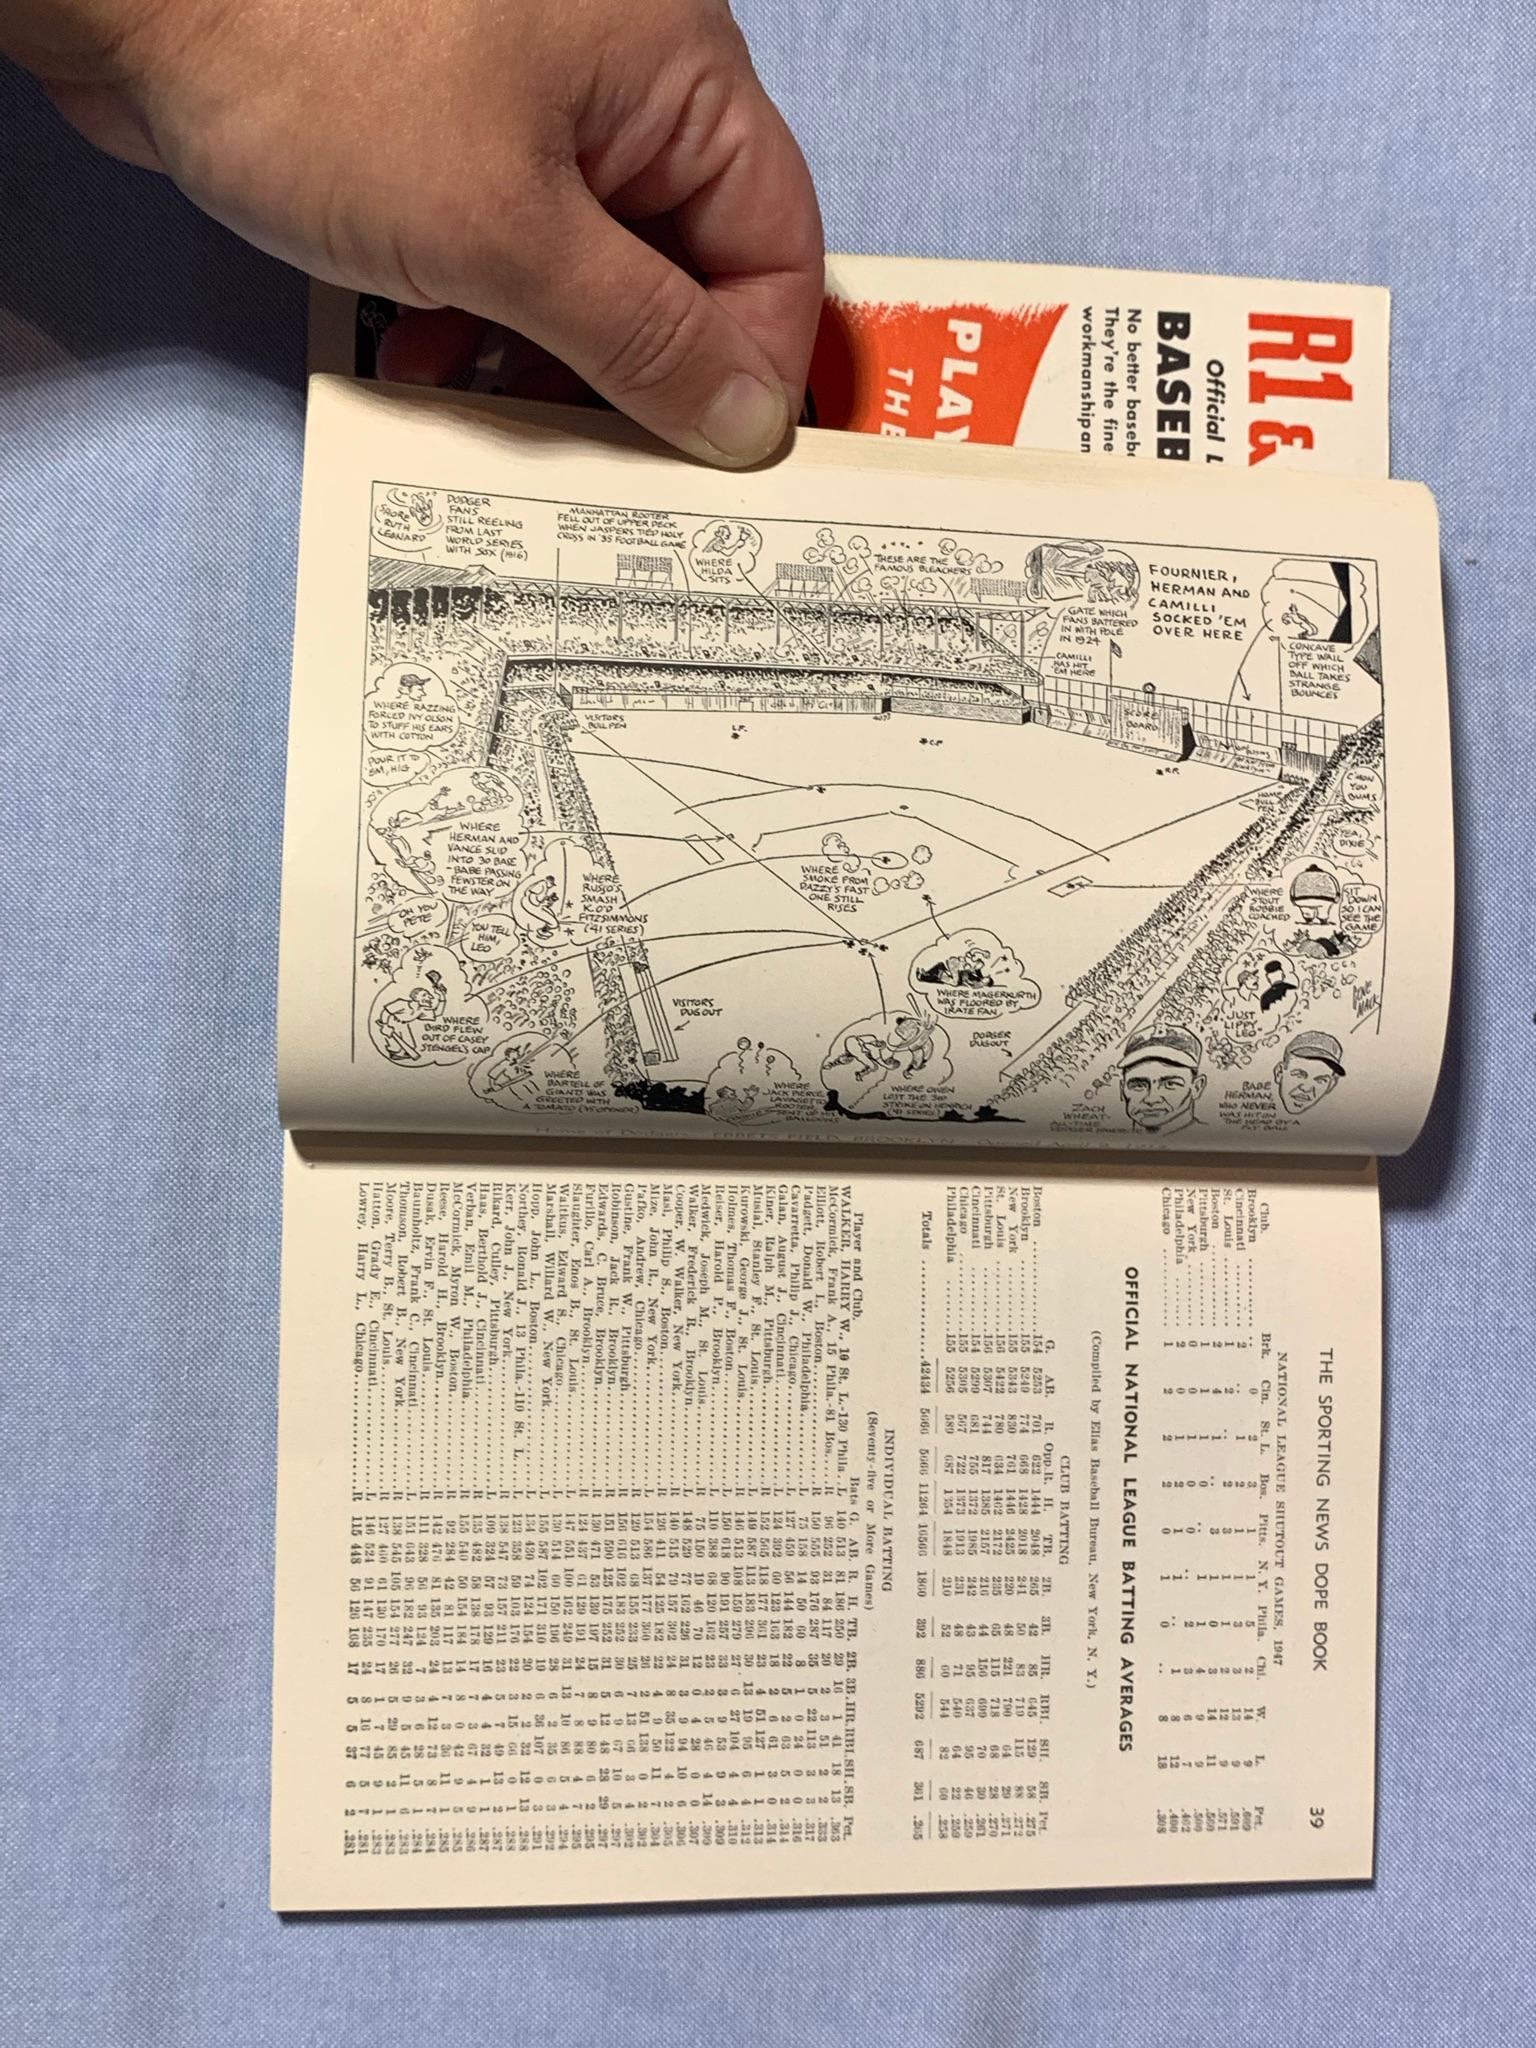 1952 Spalding Sports Show magazine, 1948 The Sporting News Dope Book,